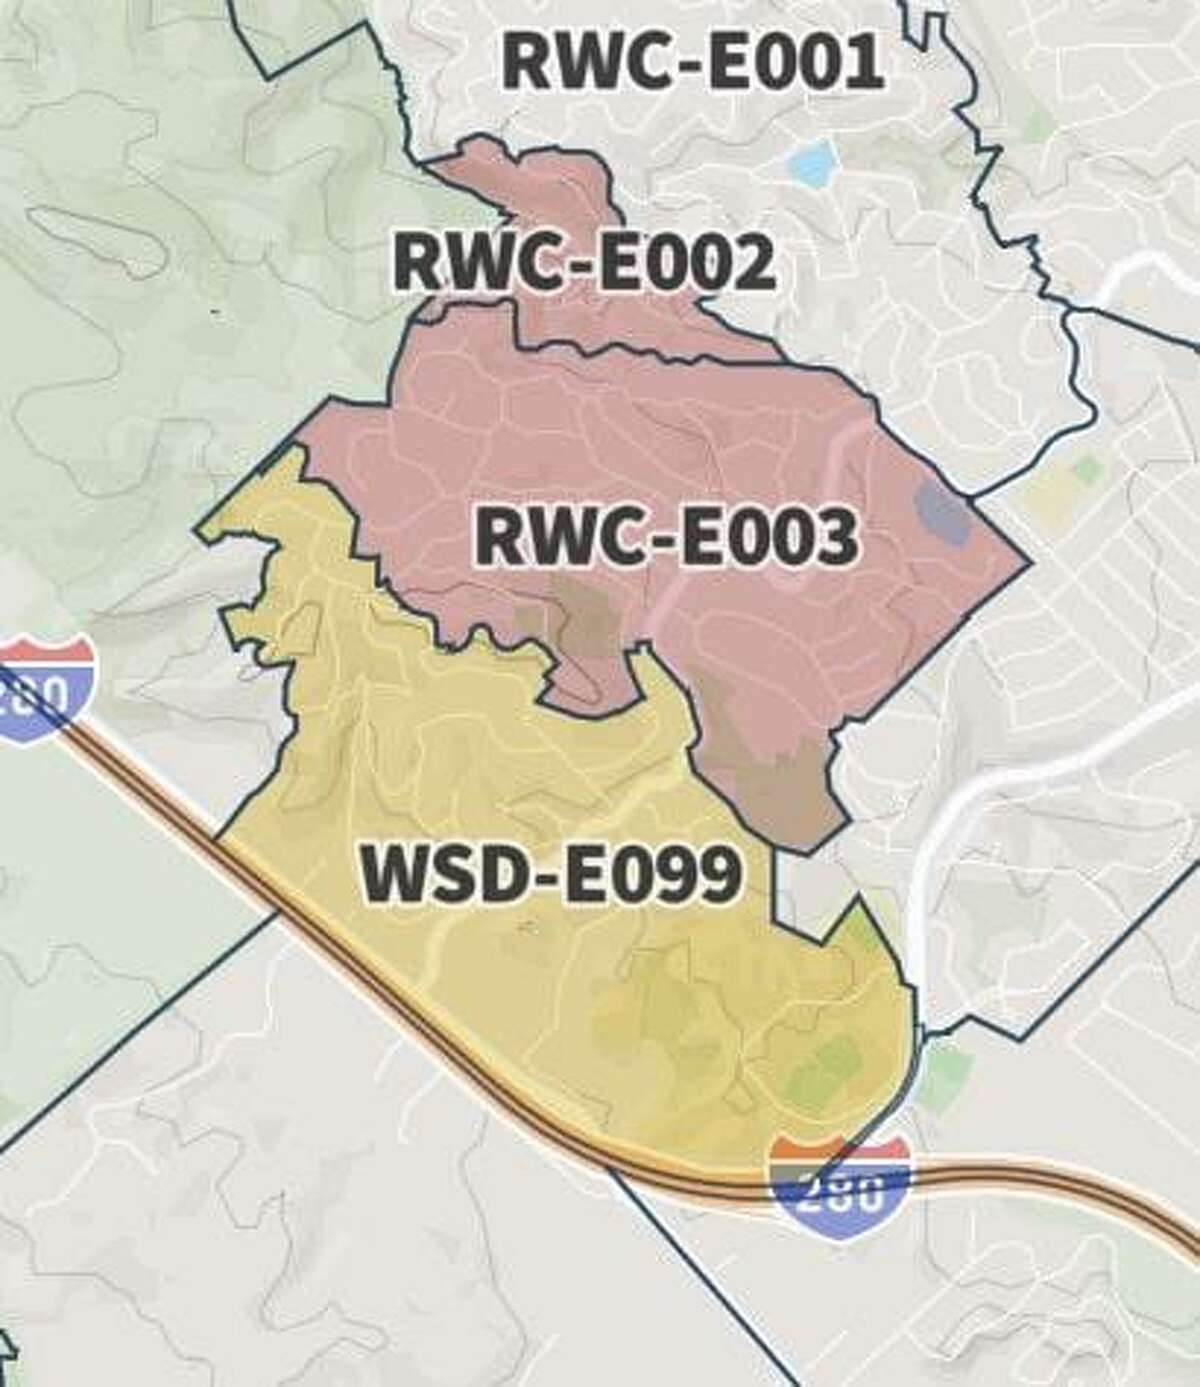 A map showing the evacuation zones in San Mateo County prompted by the Edgewood Fire. Areas shaded in red were deemed to be mandatory evacuation areas.